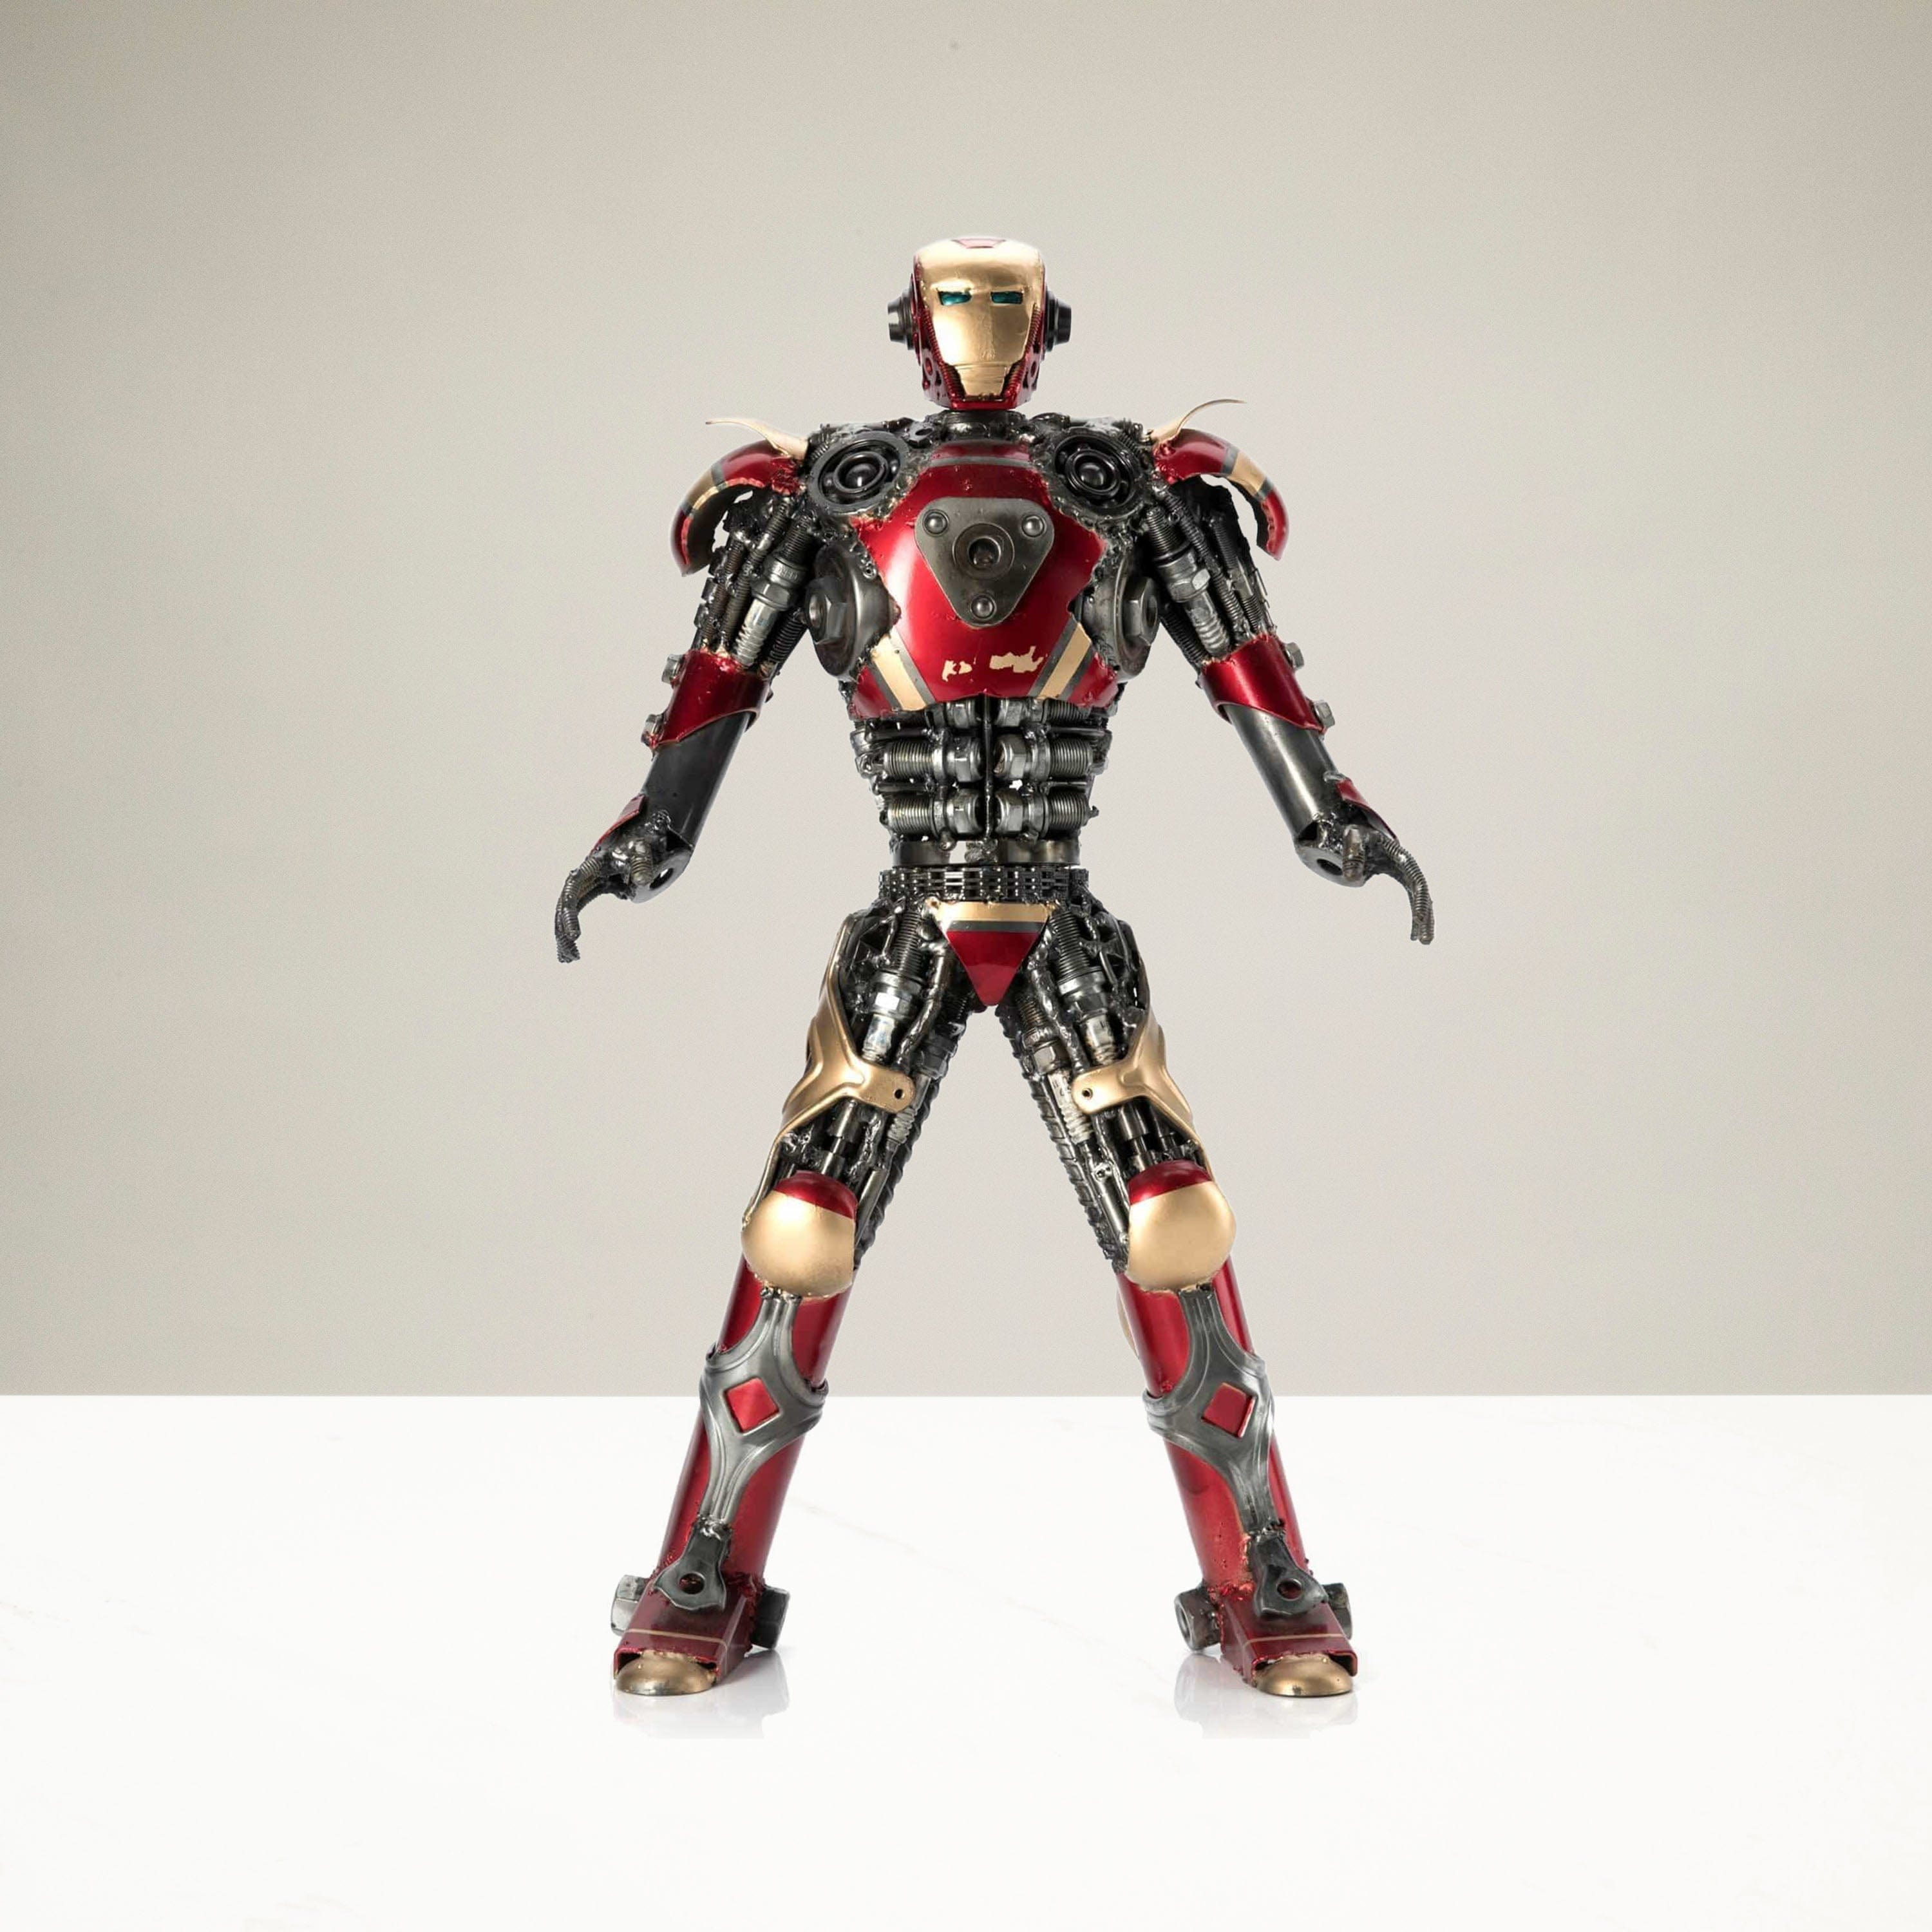 Kalifano Recycled Metal Art 20" Red Iron Man Inspired Recycled Metal Sculpture RMS-IMR50x34-S